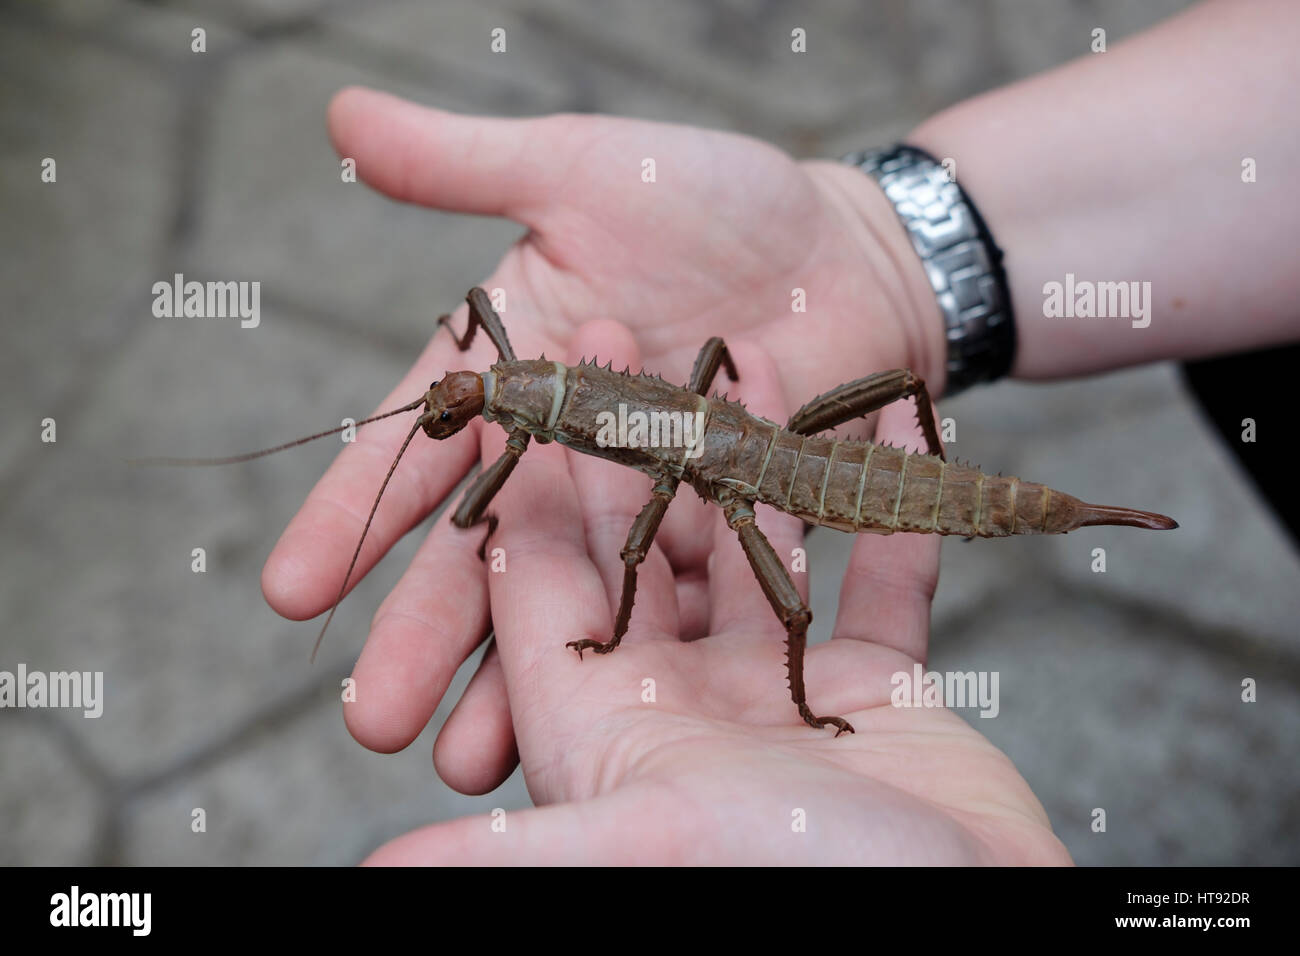 A giant spiny stick insect / thorny devil insect (Eurycantha calcarata) on the hands of a nature interpreter, Cambridge Butterfly Conservatory, Canada Stock Photo